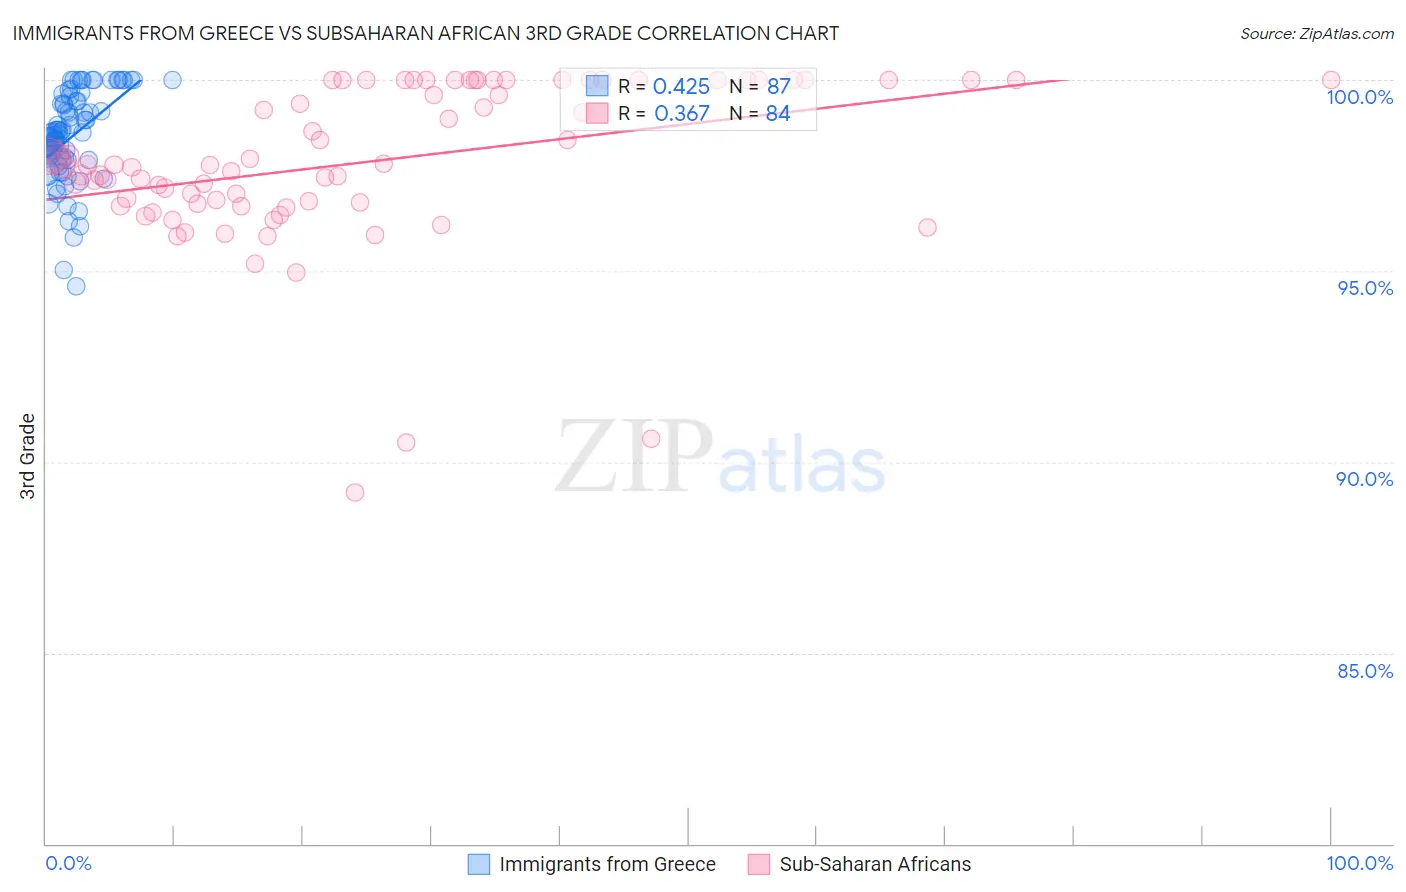 Immigrants from Greece vs Subsaharan African 3rd Grade